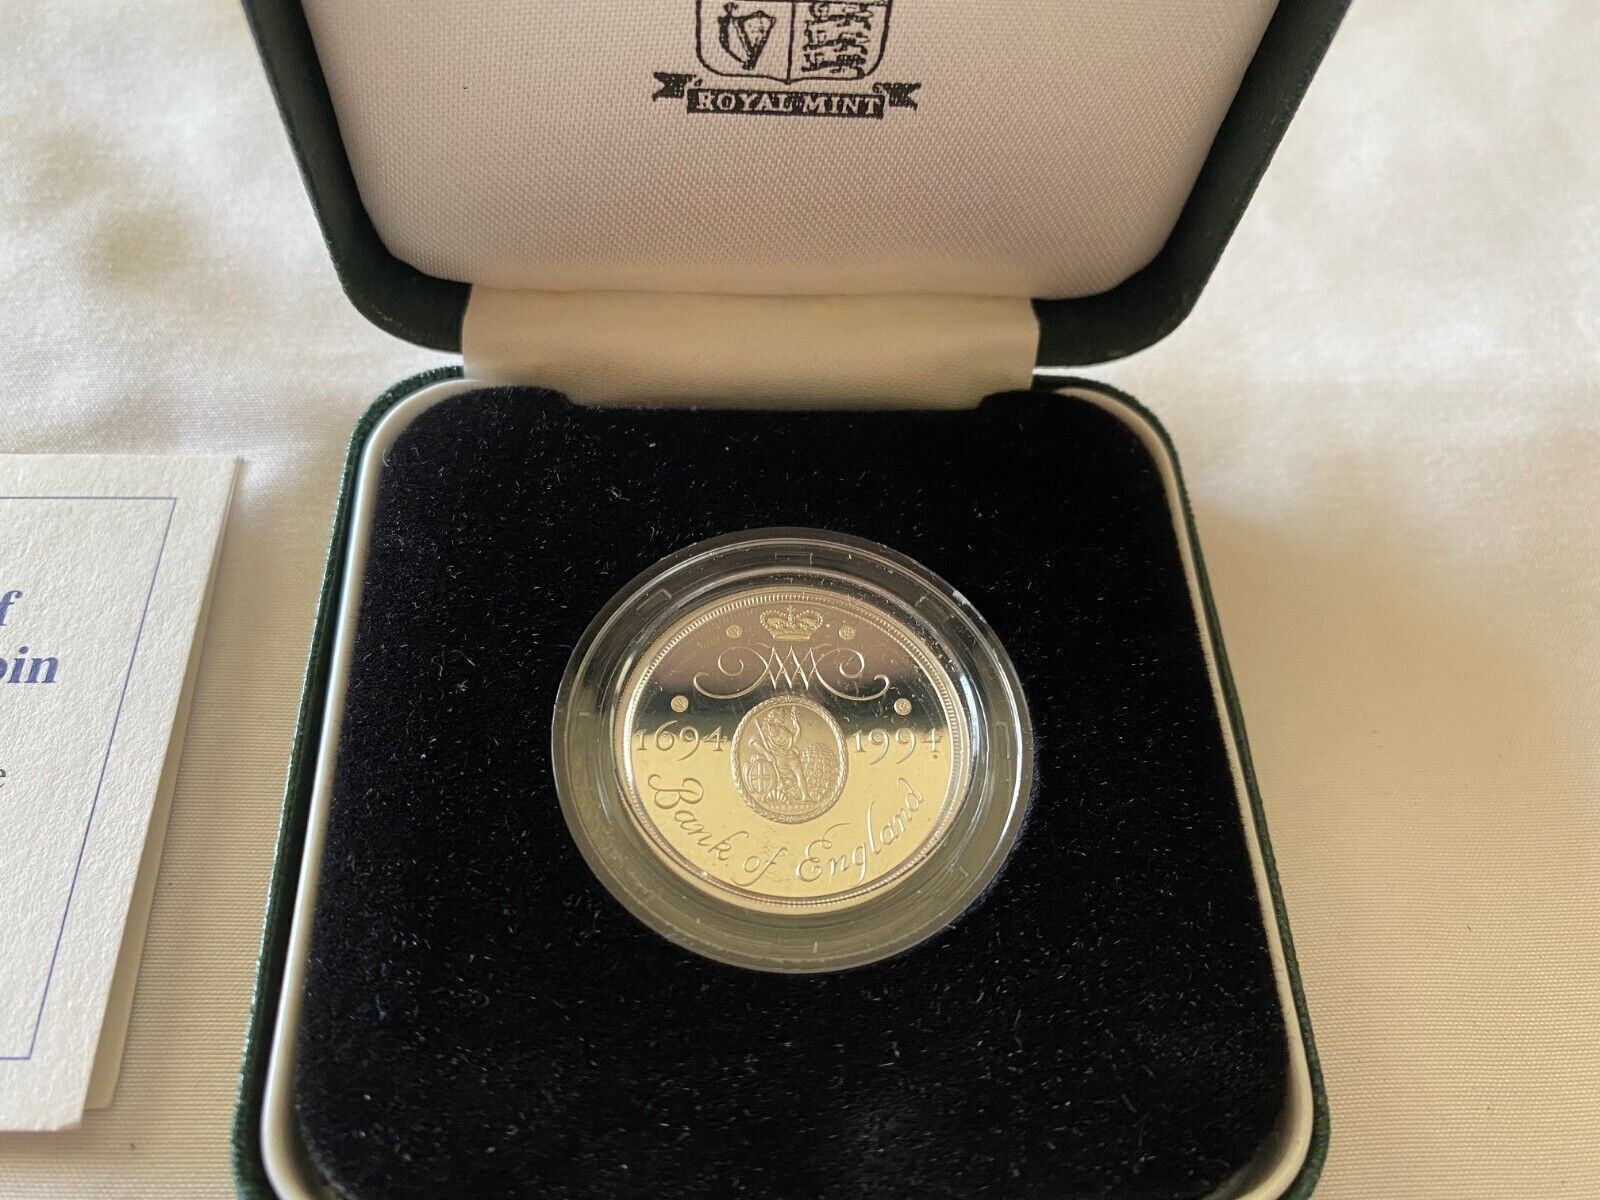 1994 UNITED KINGDOM Silver Proof Two Pound Coin With Box & COA